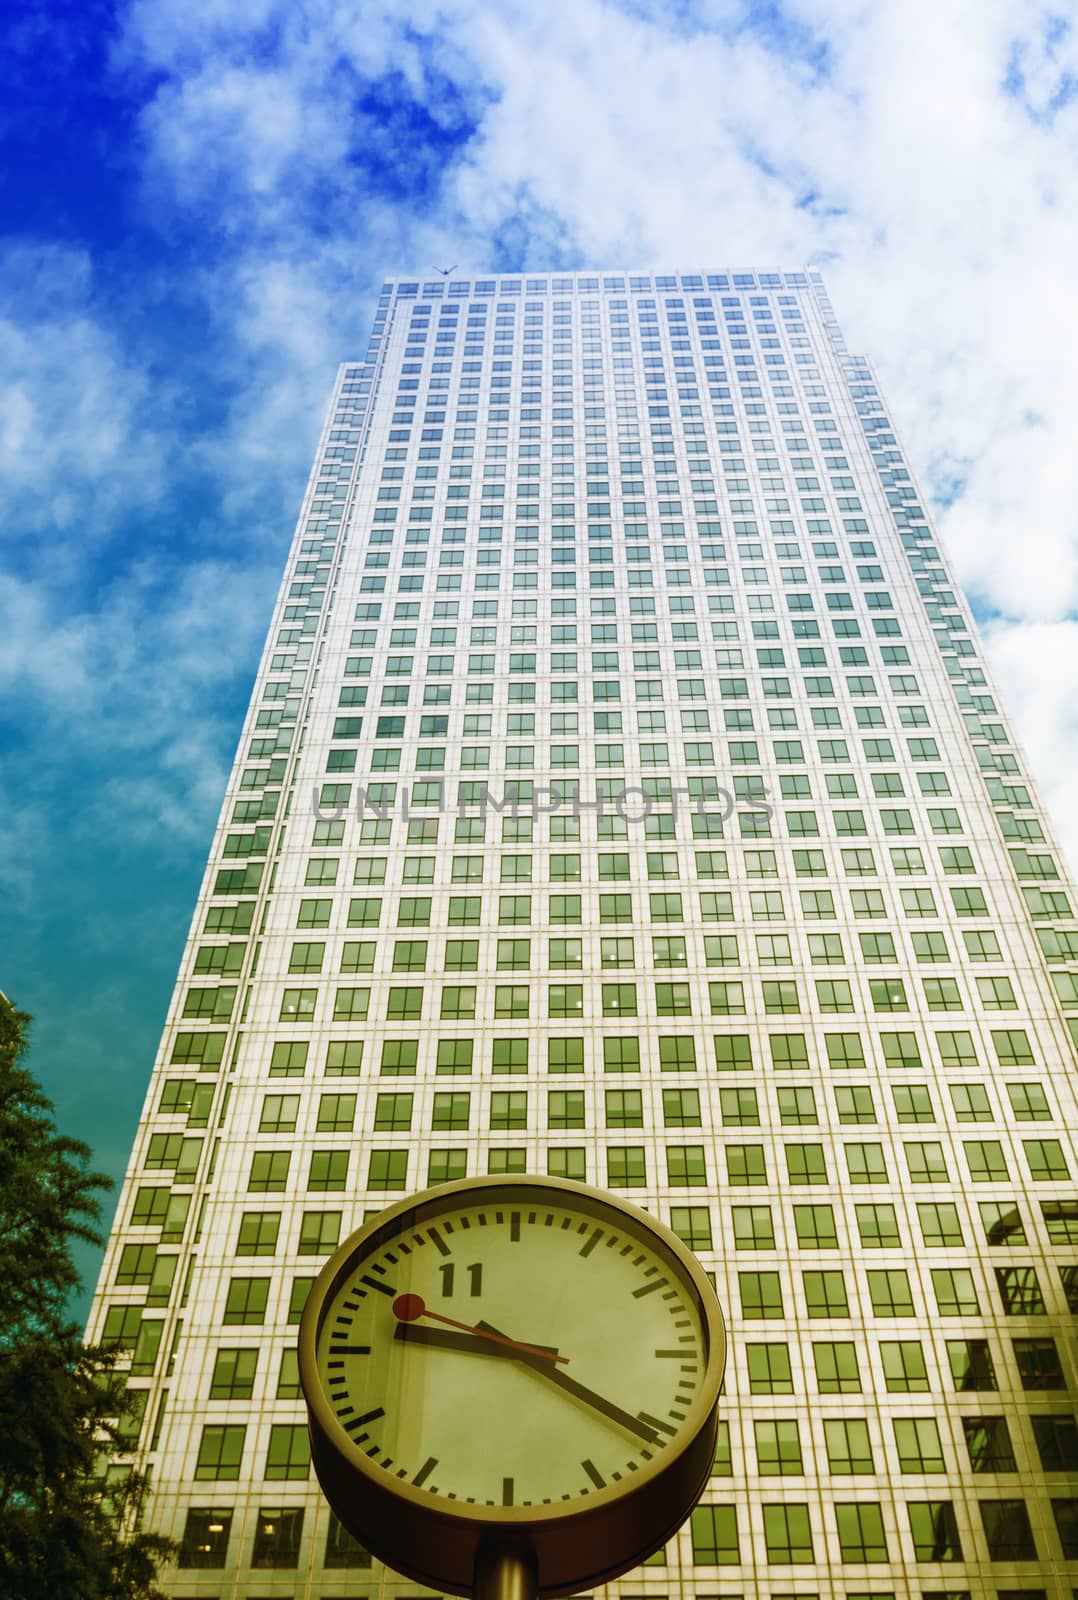 Clock and Skyscrapers at Canary Wharf, financial district in London. England.